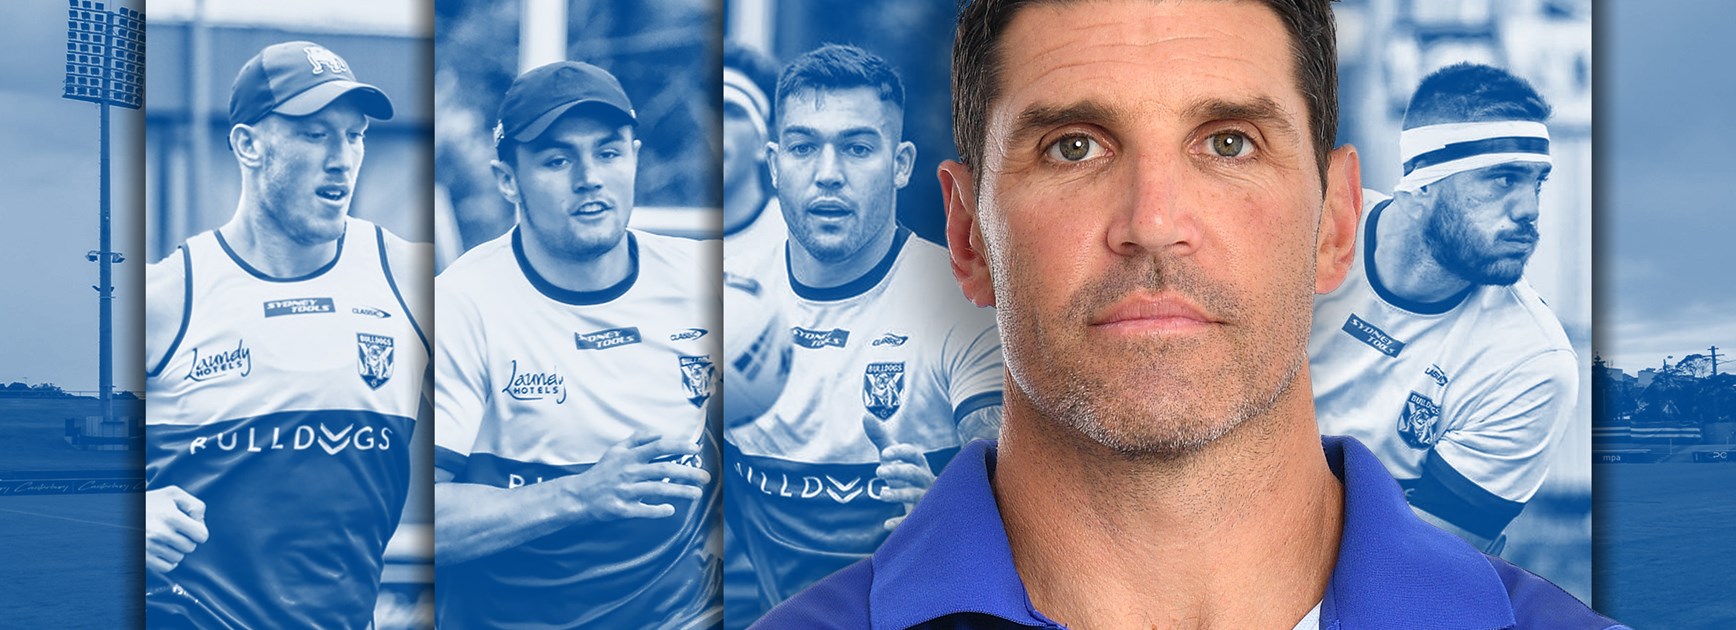 'People want to play for him': Inside Barrett's Bulldogs revolution